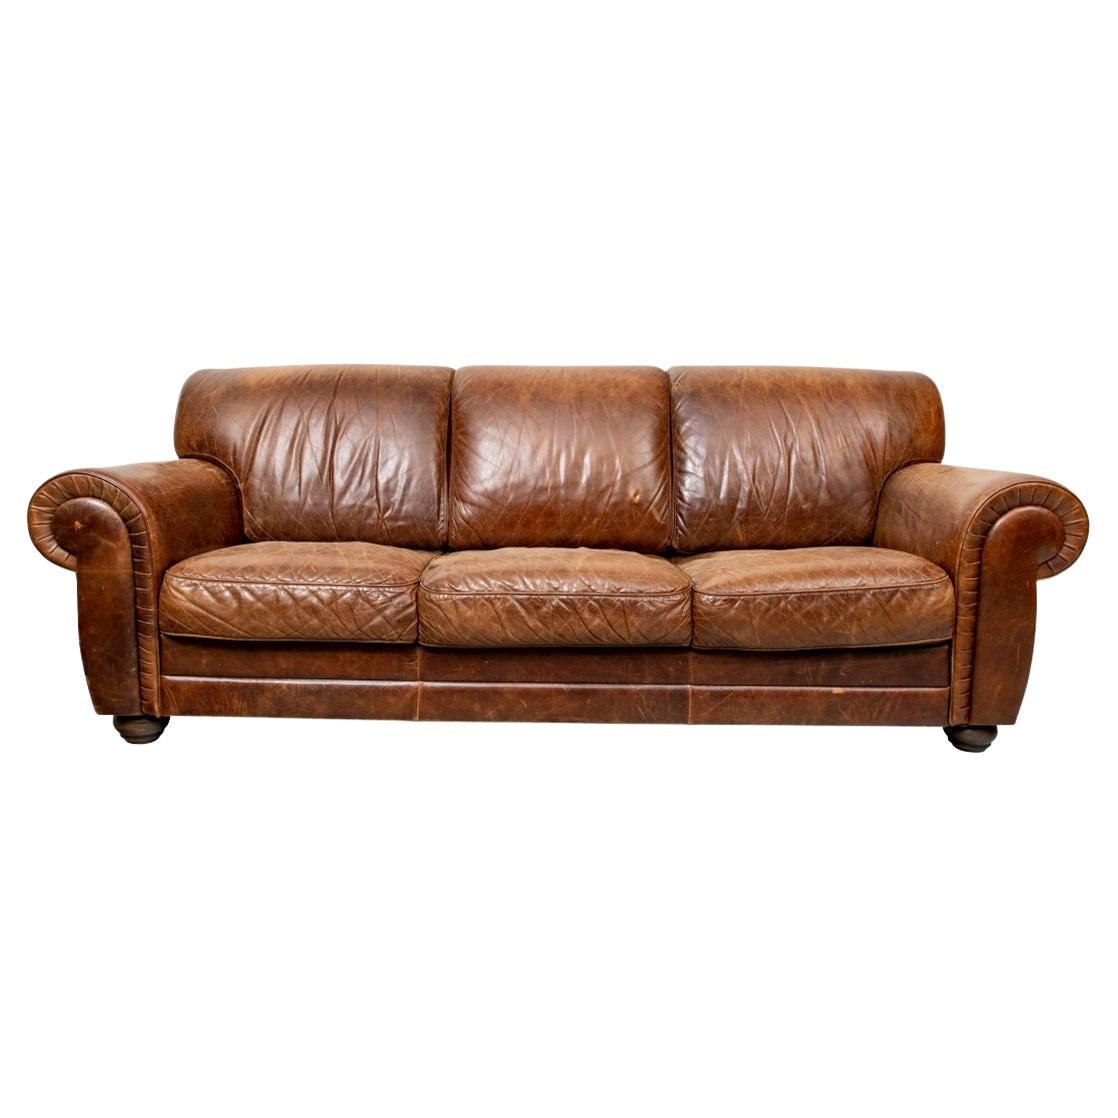 Classic Worn Leather Three Seat Sofa For Sale at 1stDibs